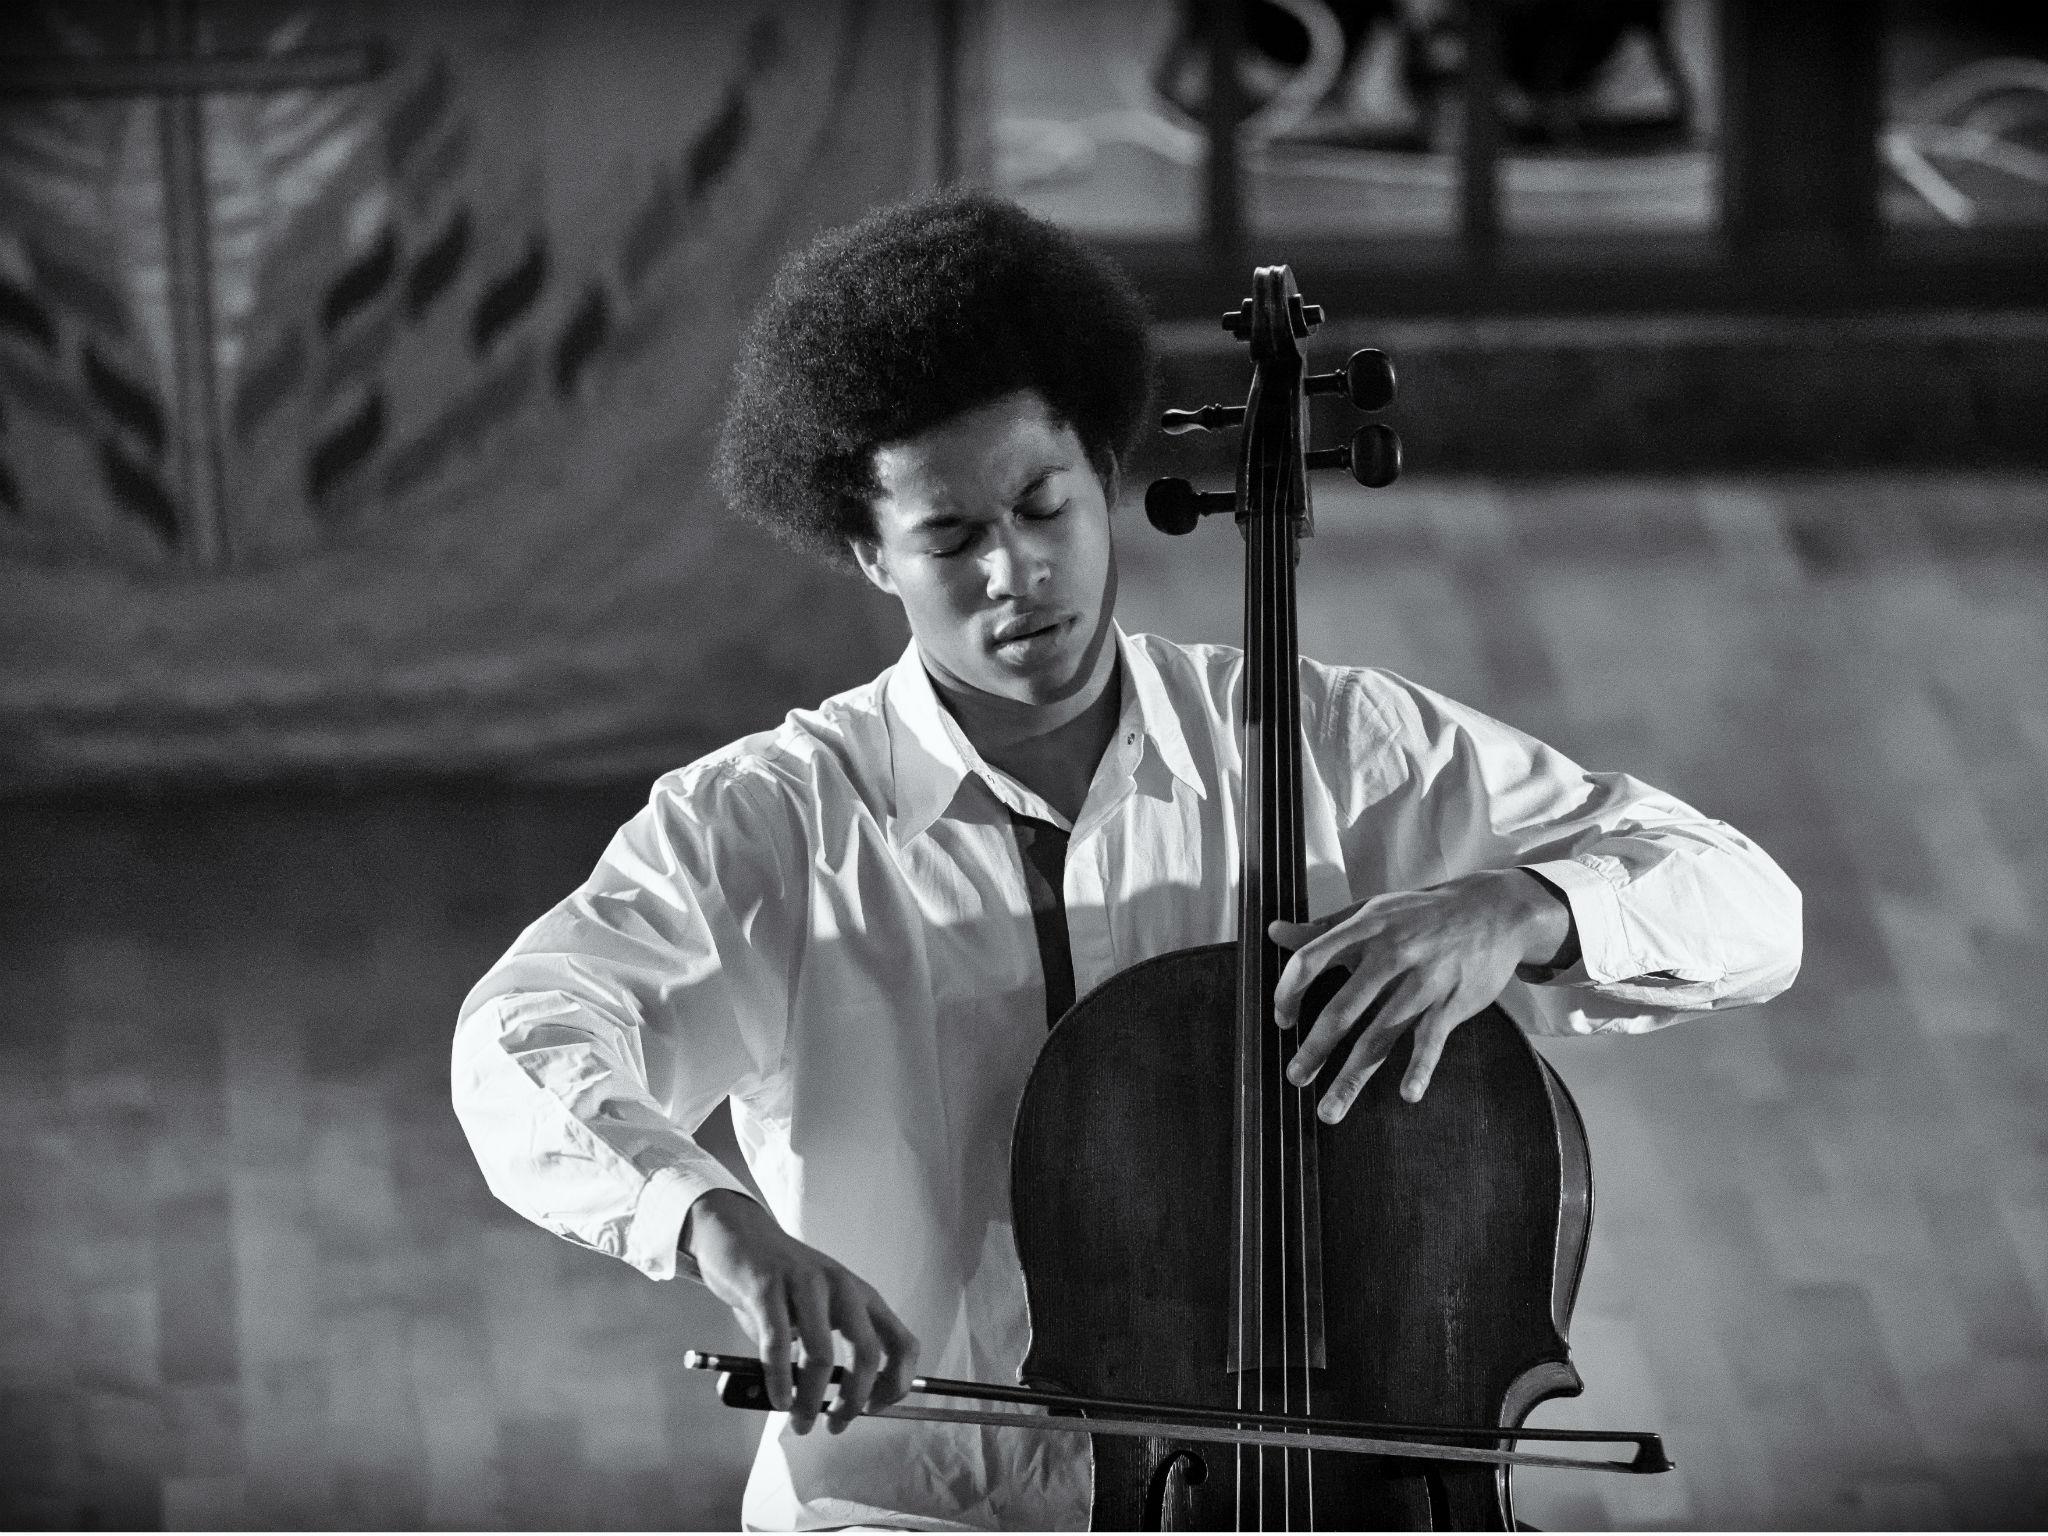 The cellist Sheku Kanneh-Mason performed at King's Place with his sister Isata